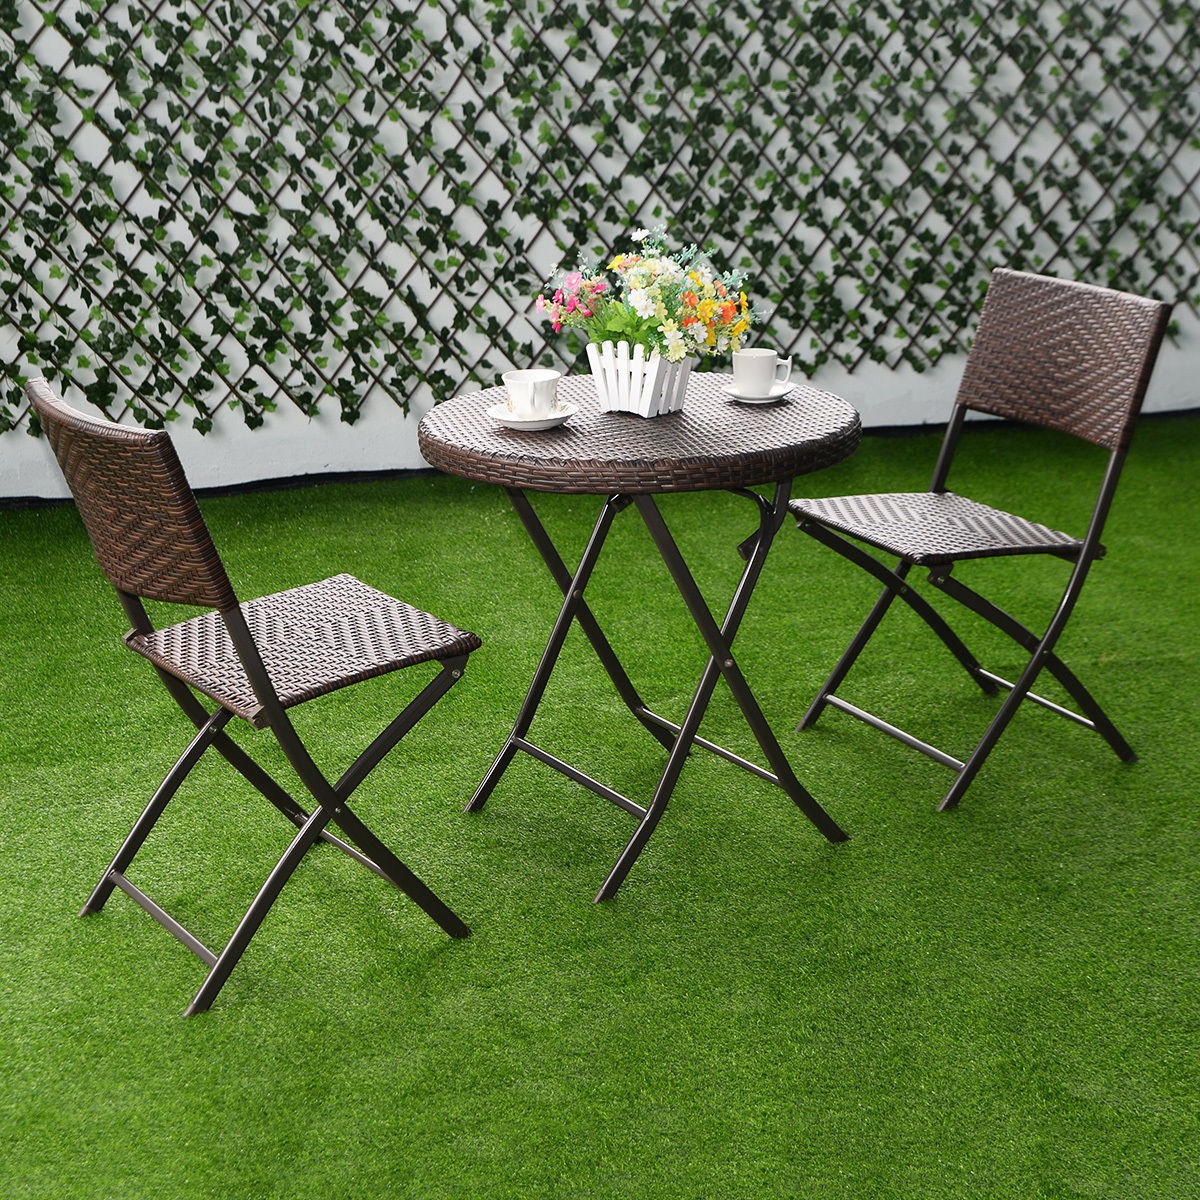 3PC Folding Round Table And Chair Bistro Set Rattan Wicker Outdoor Furniture